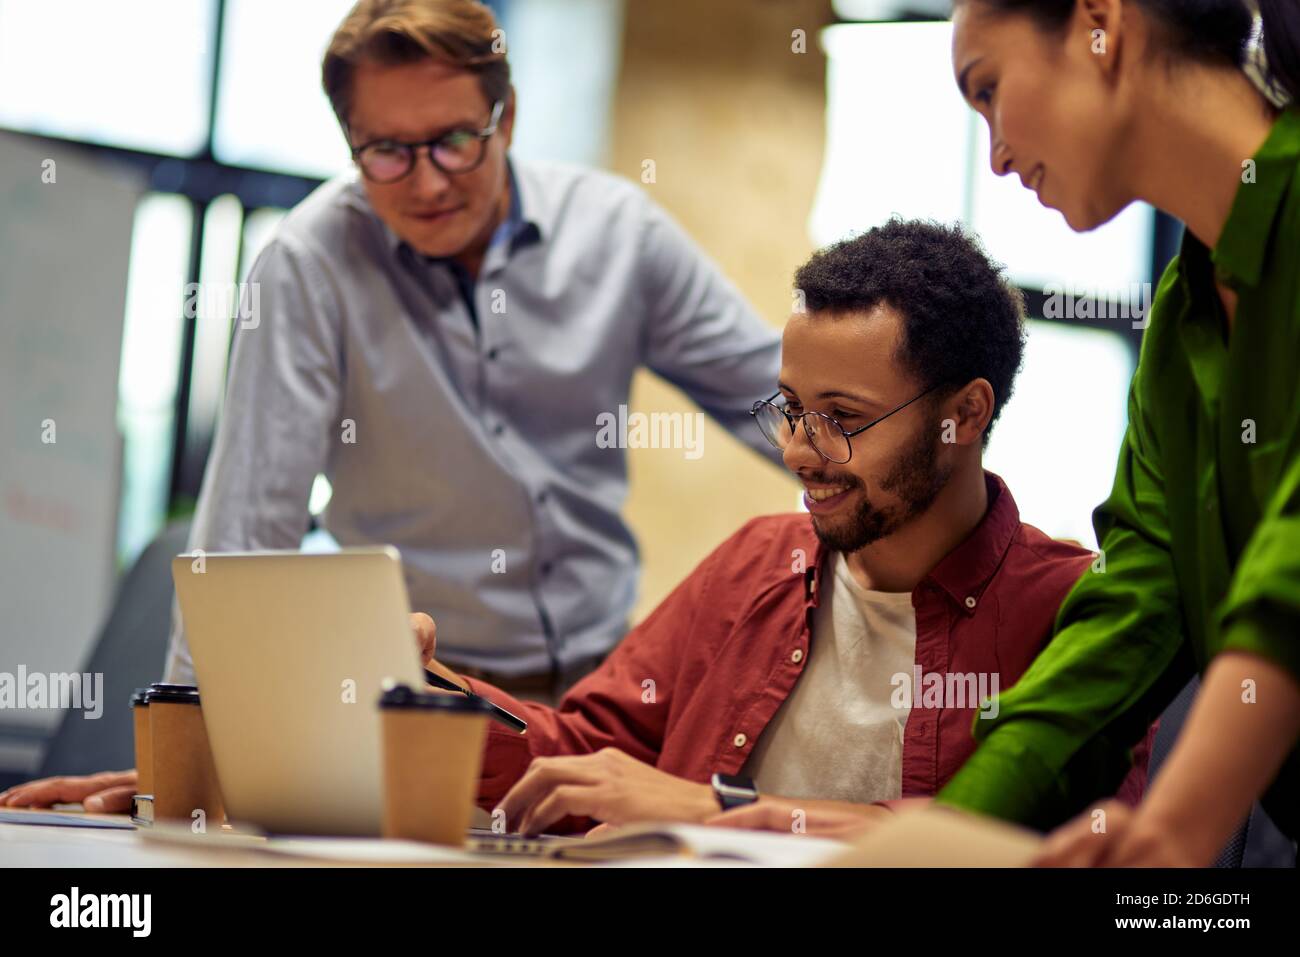 Successful project team. Group of focused multiracial business people looking at laptop screen and discussing work or project results while standing in the modern office or coworking space Stock Photo